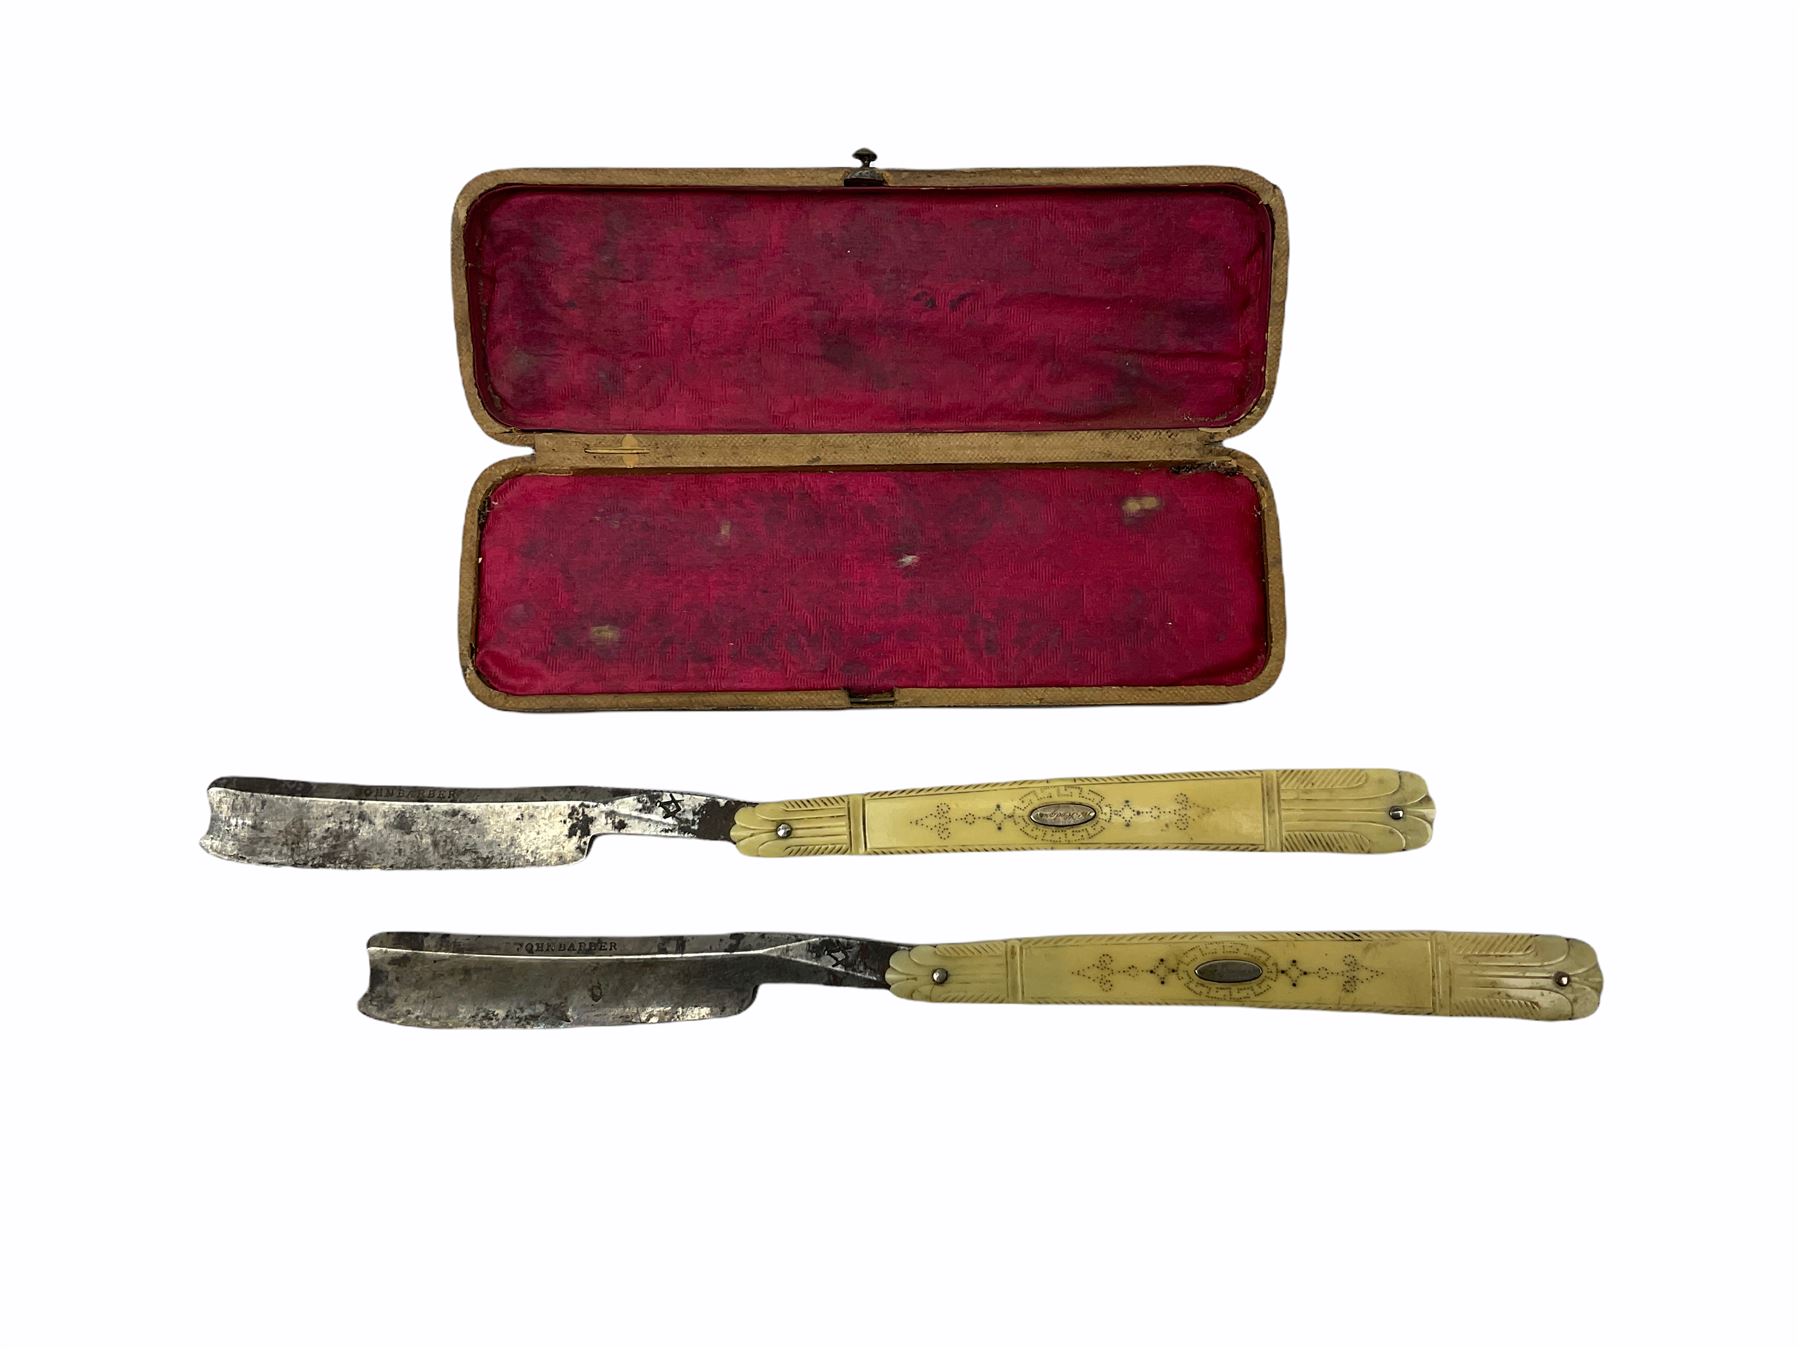 Pair of early 19th century John Barber ivory cut-throat razors with pique work decoration